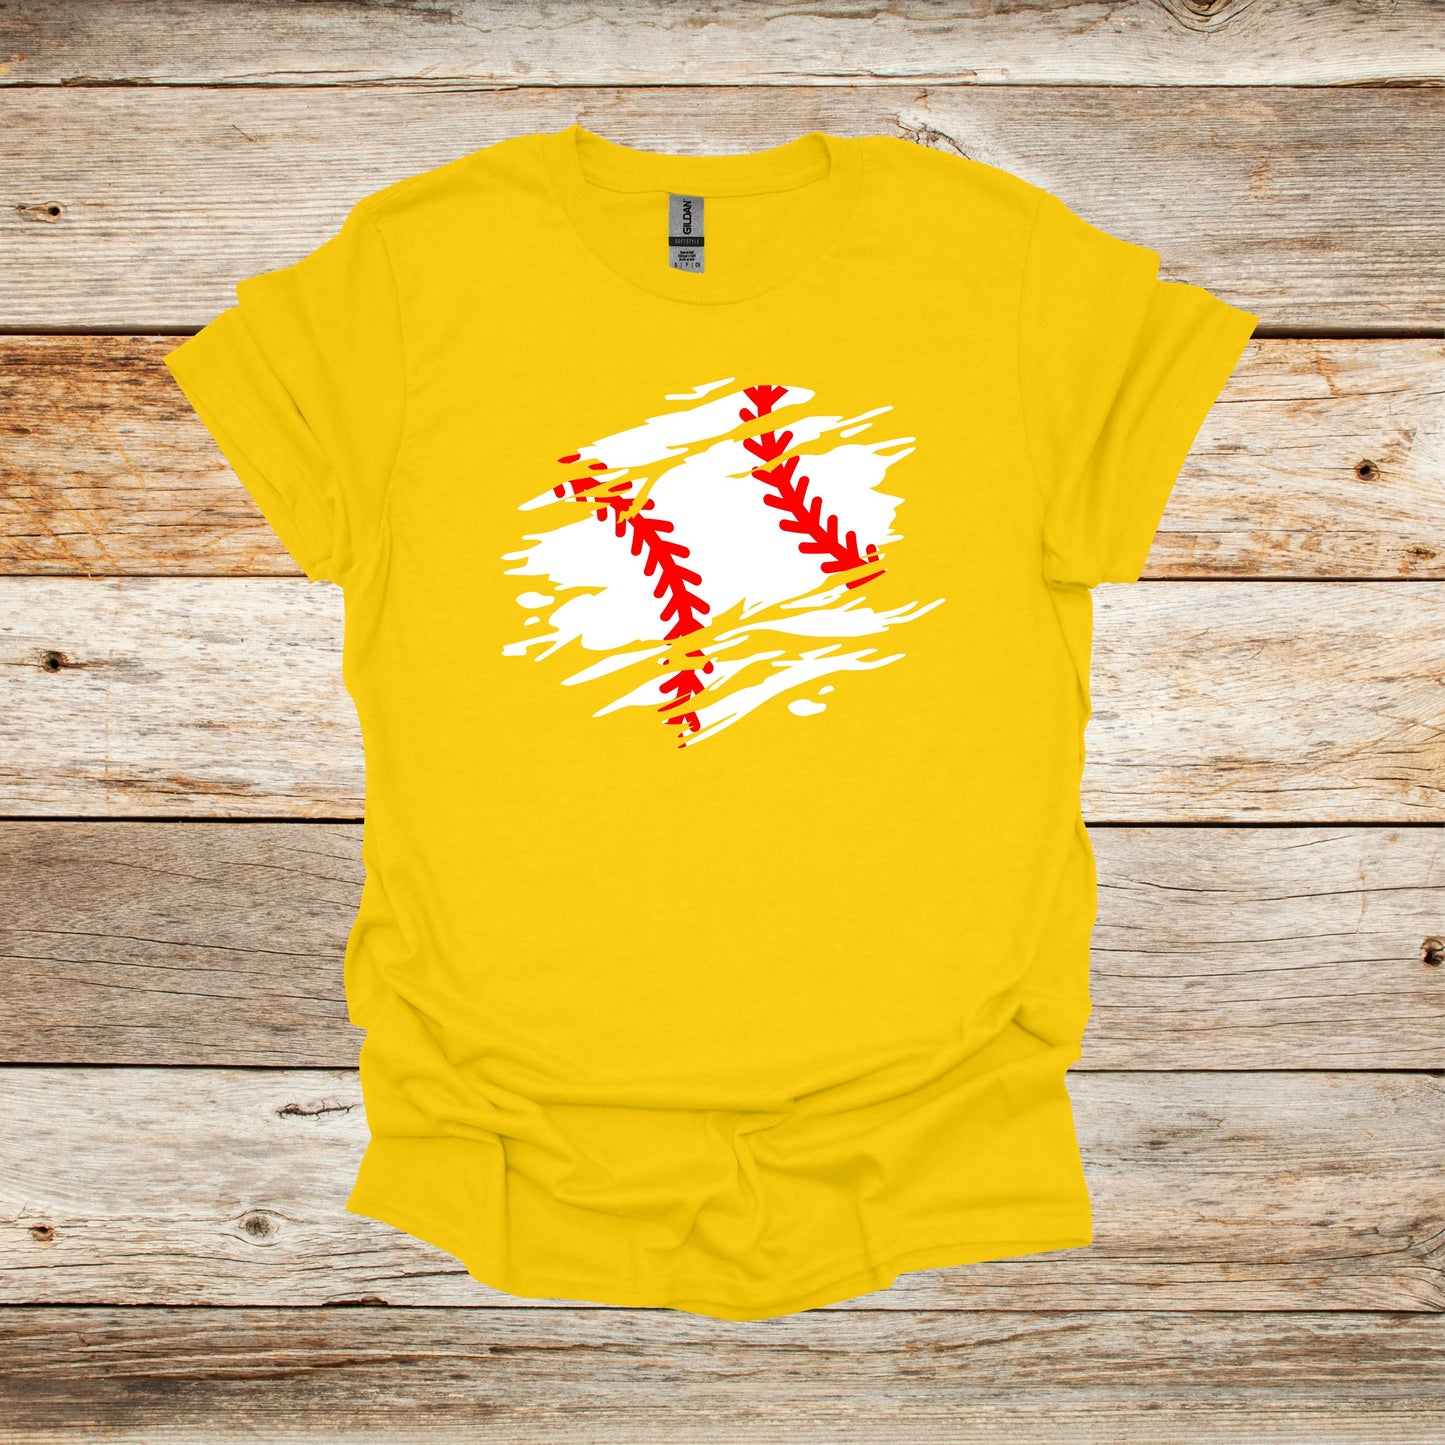 Baseball T-Shirt - Adult and Children's Tee Shirts - Sports T-Shirts Graphic Avenue Daisy Adult Small 